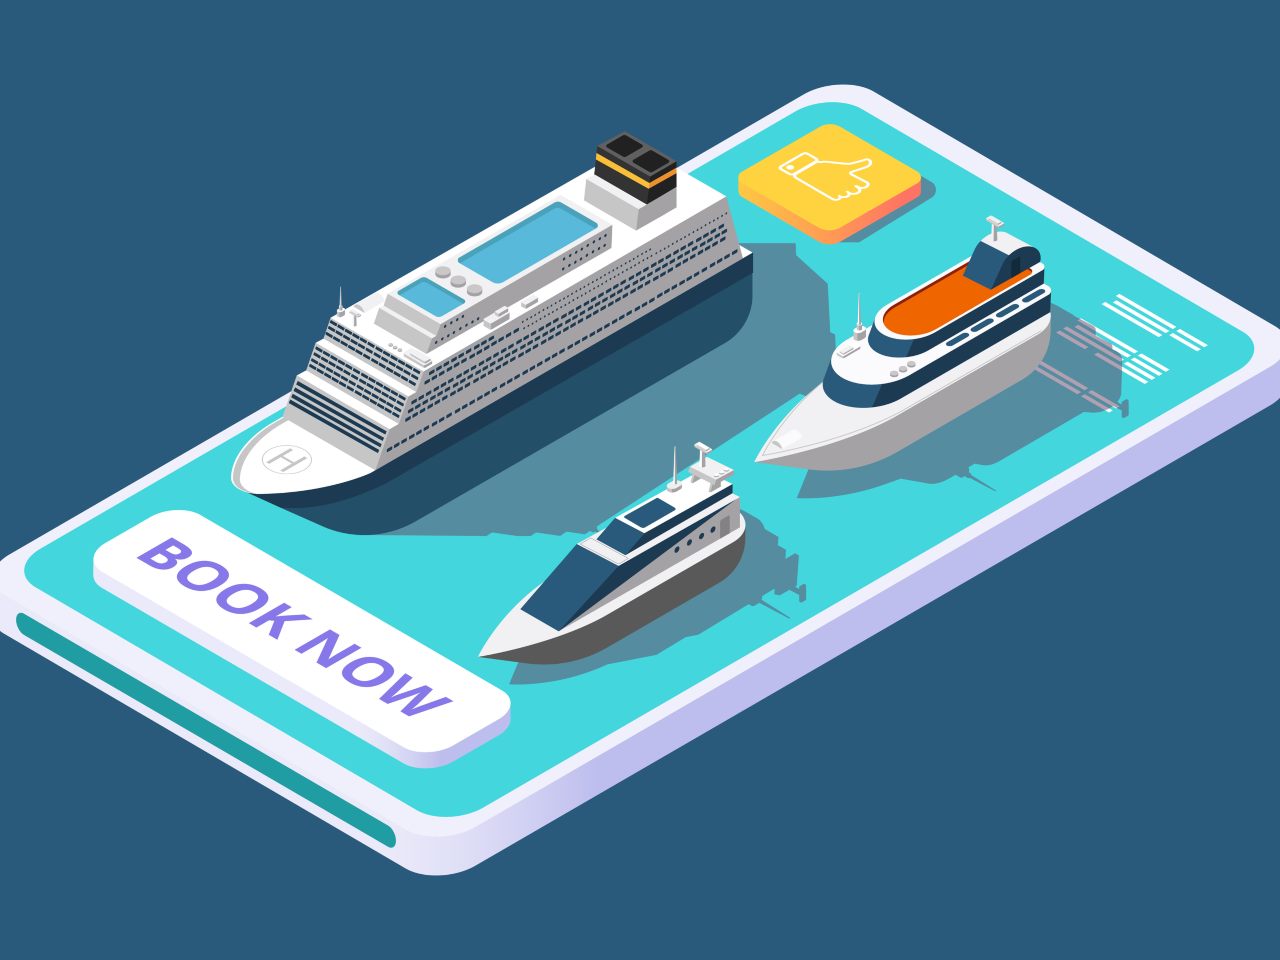 How technology can drive people to take a cruise (Mobile app for booking cruise concept)